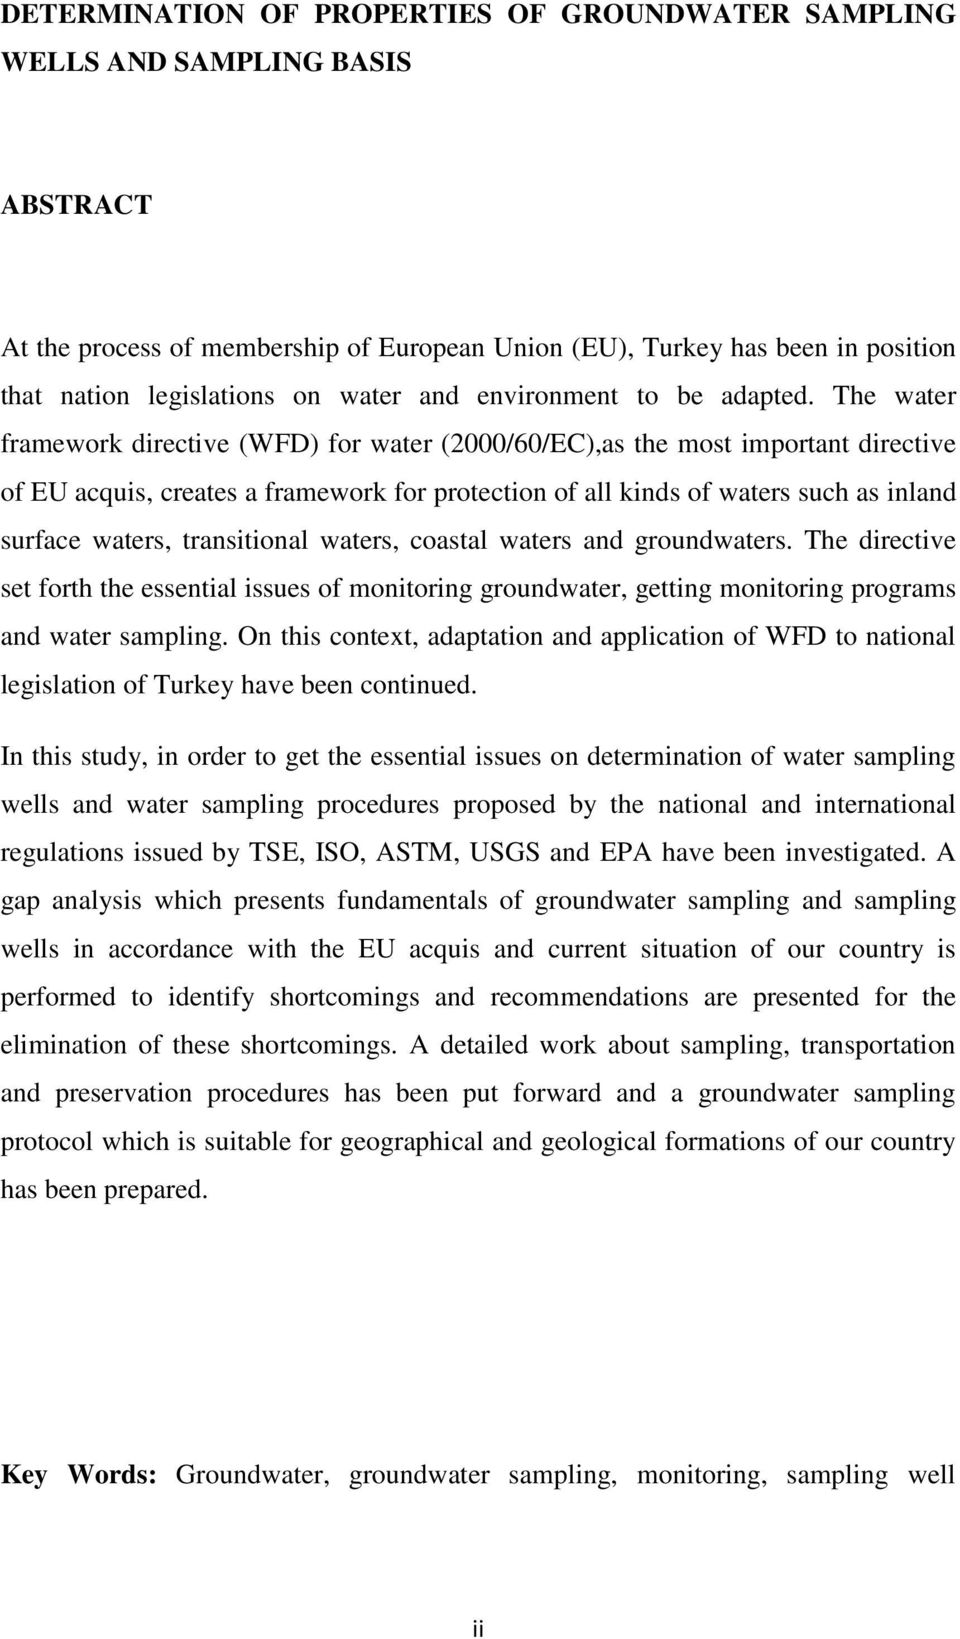 The water framework directive (WFD) for water (2000/60/EC),as the most important directive of EU acquis, creates a framework for protection of all kinds of waters such as inland surface waters,